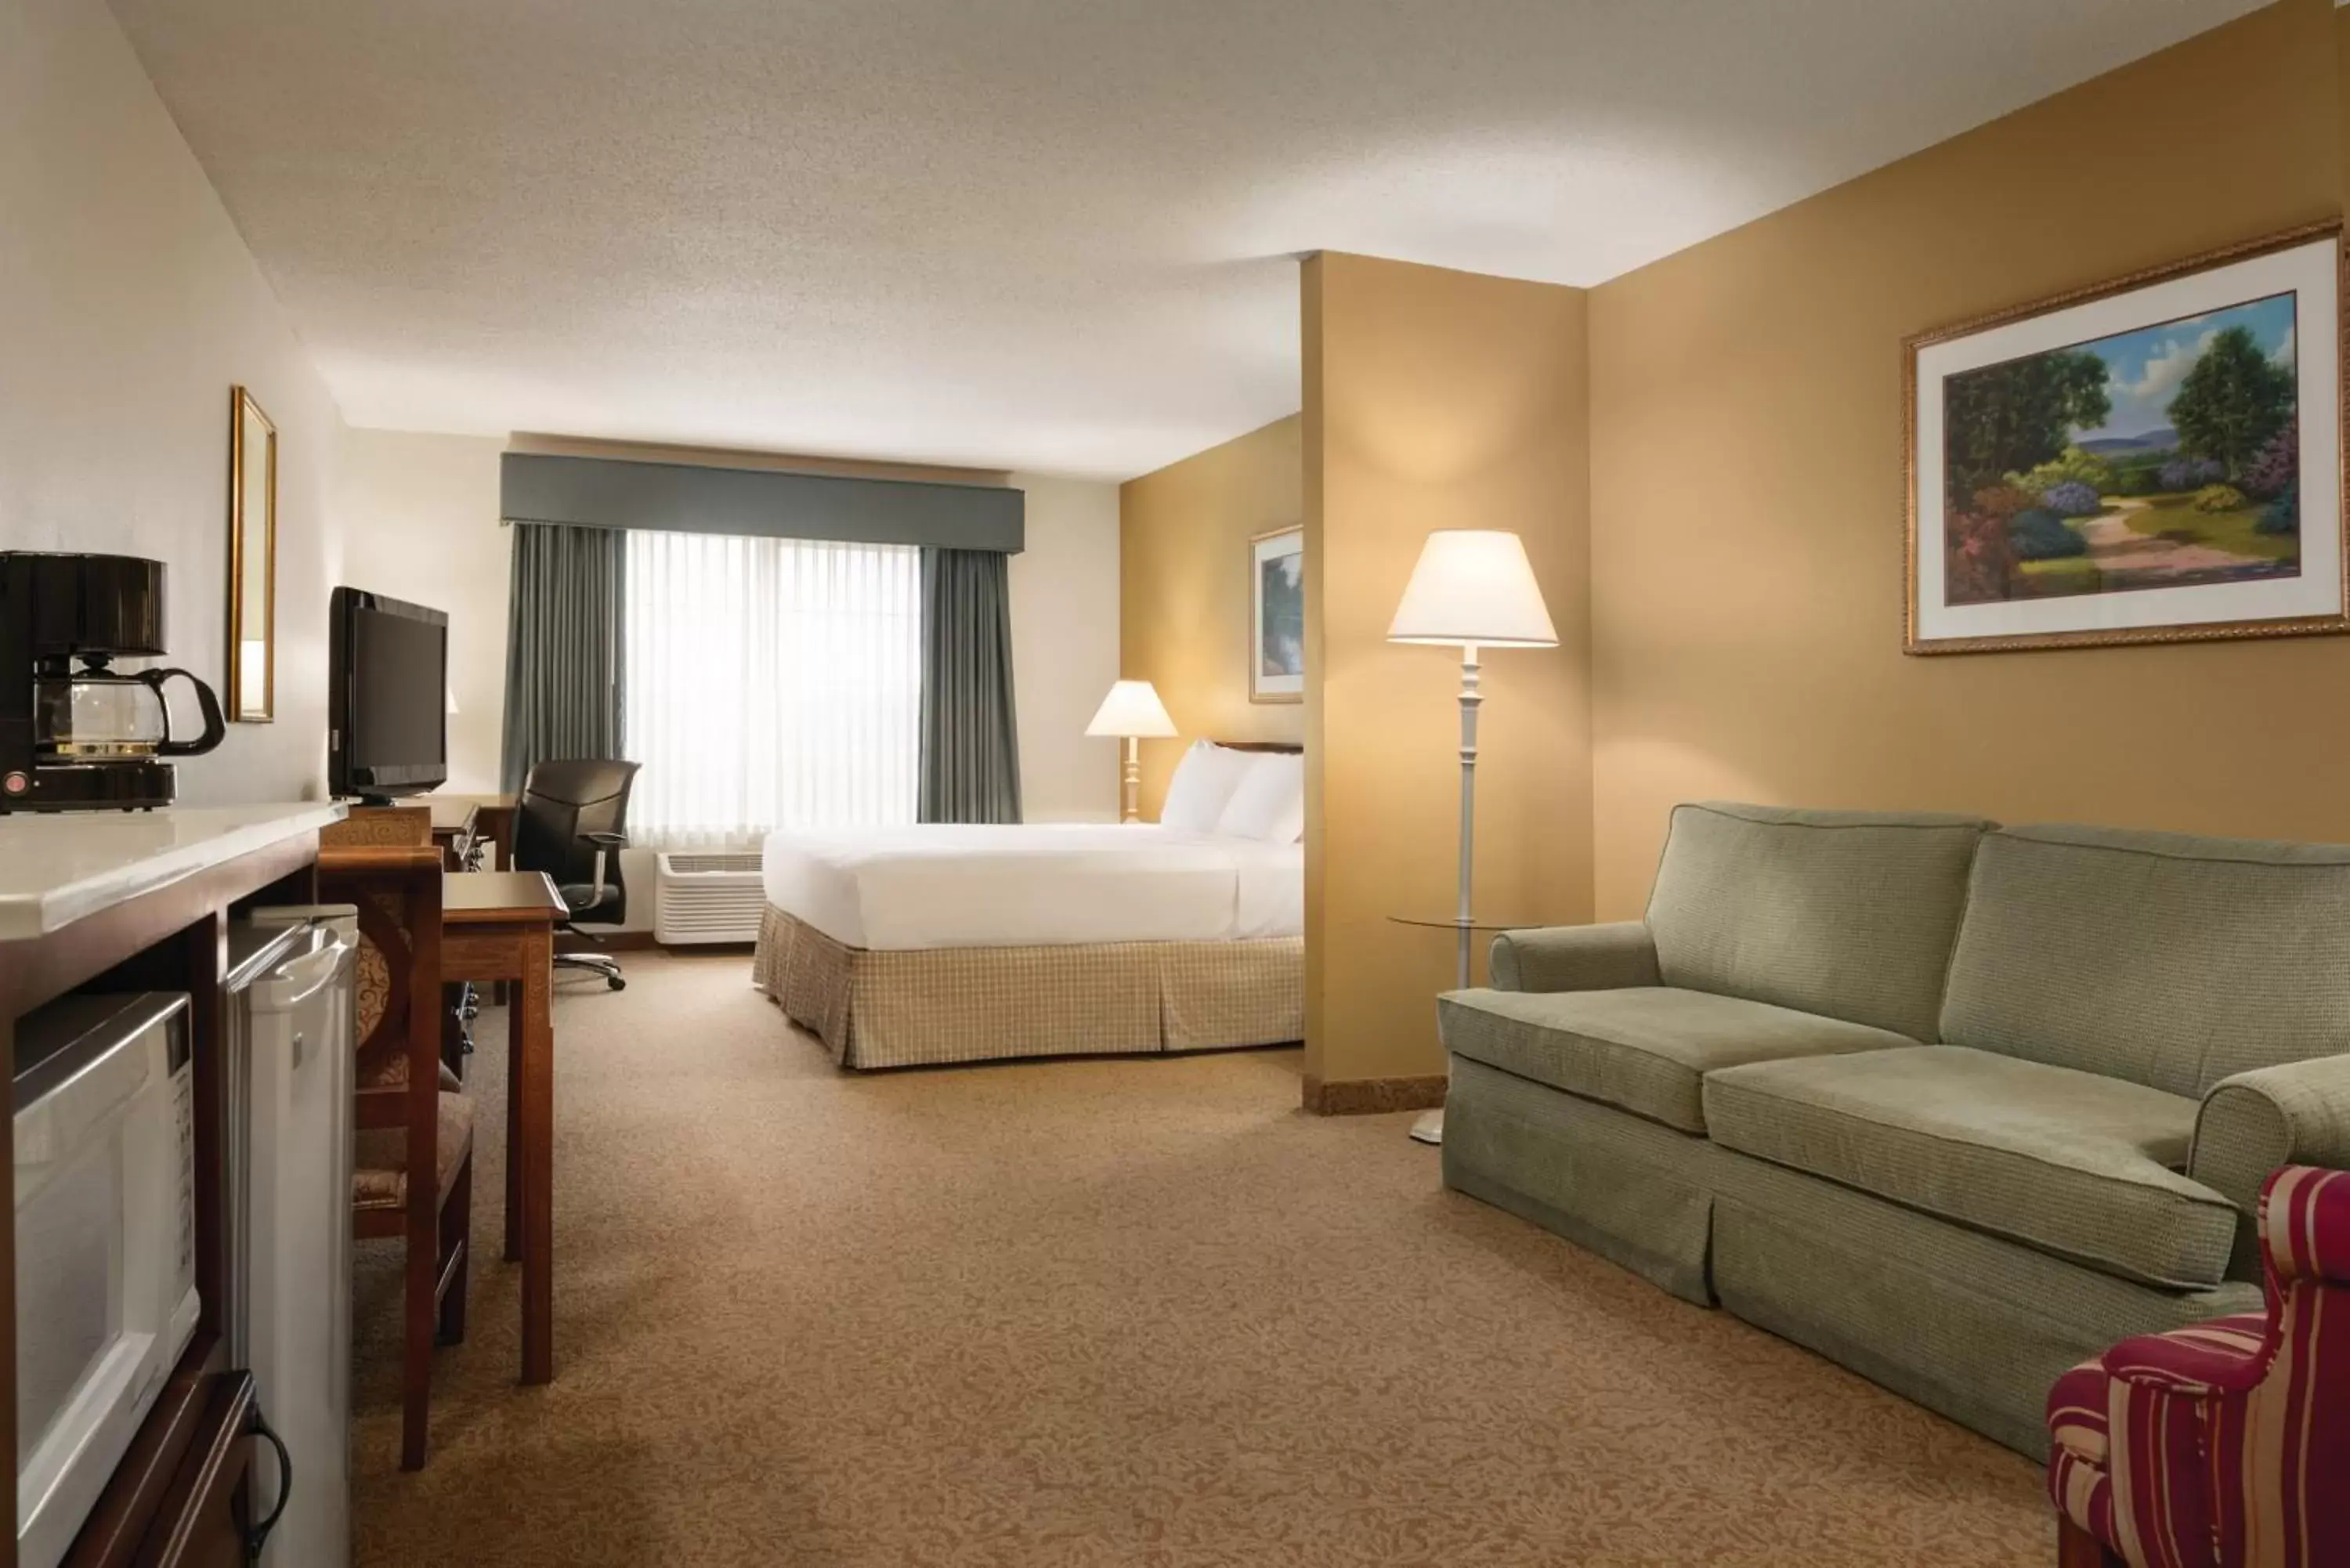 Bedroom in Country Inn & Suites by Radisson, Mankato Hotel and Conference Center, MN